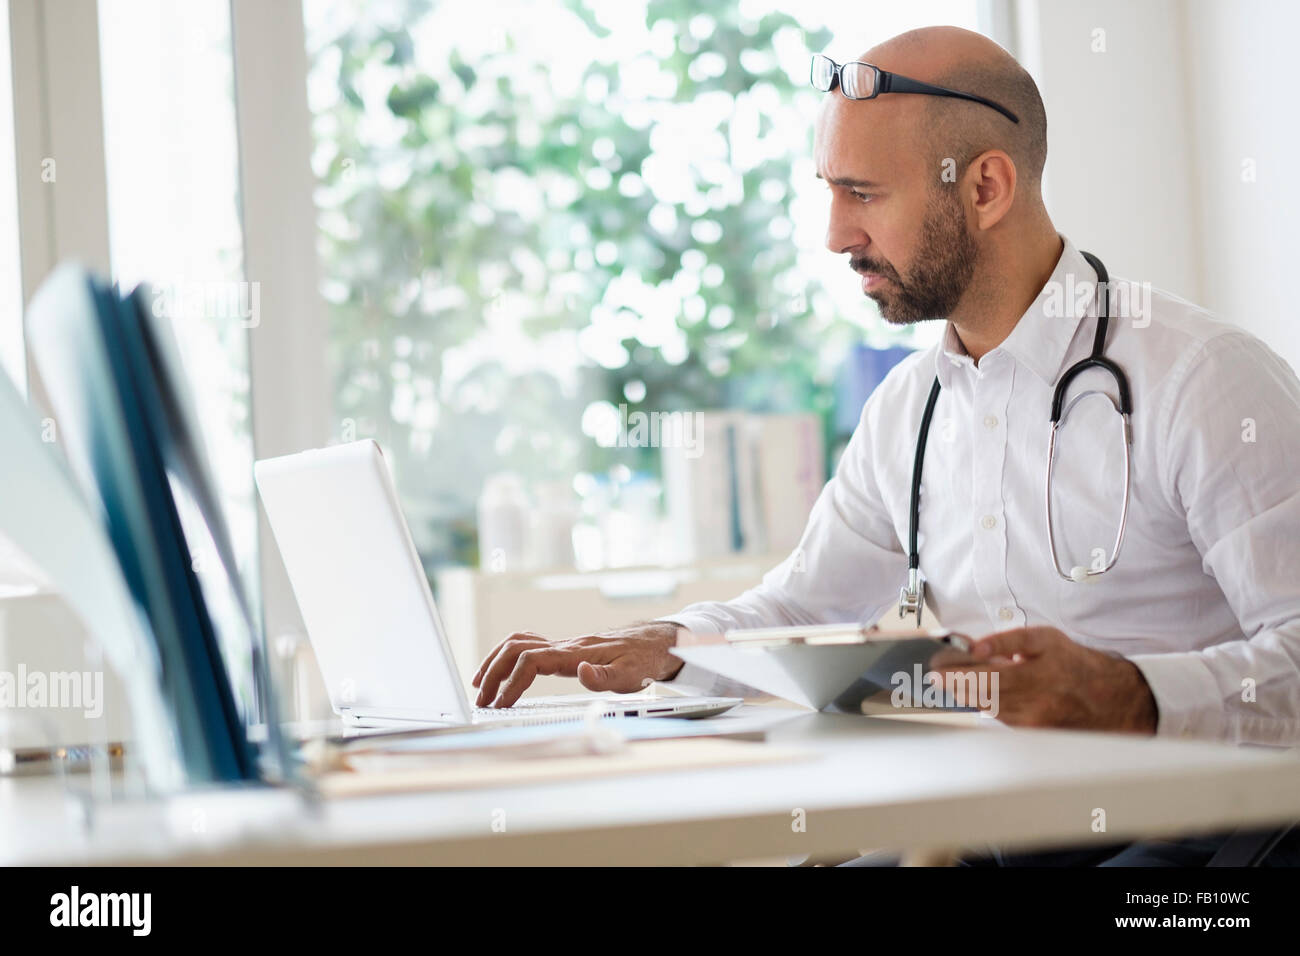 Concentrated doctor working with laptop at desk in office Stock Photo